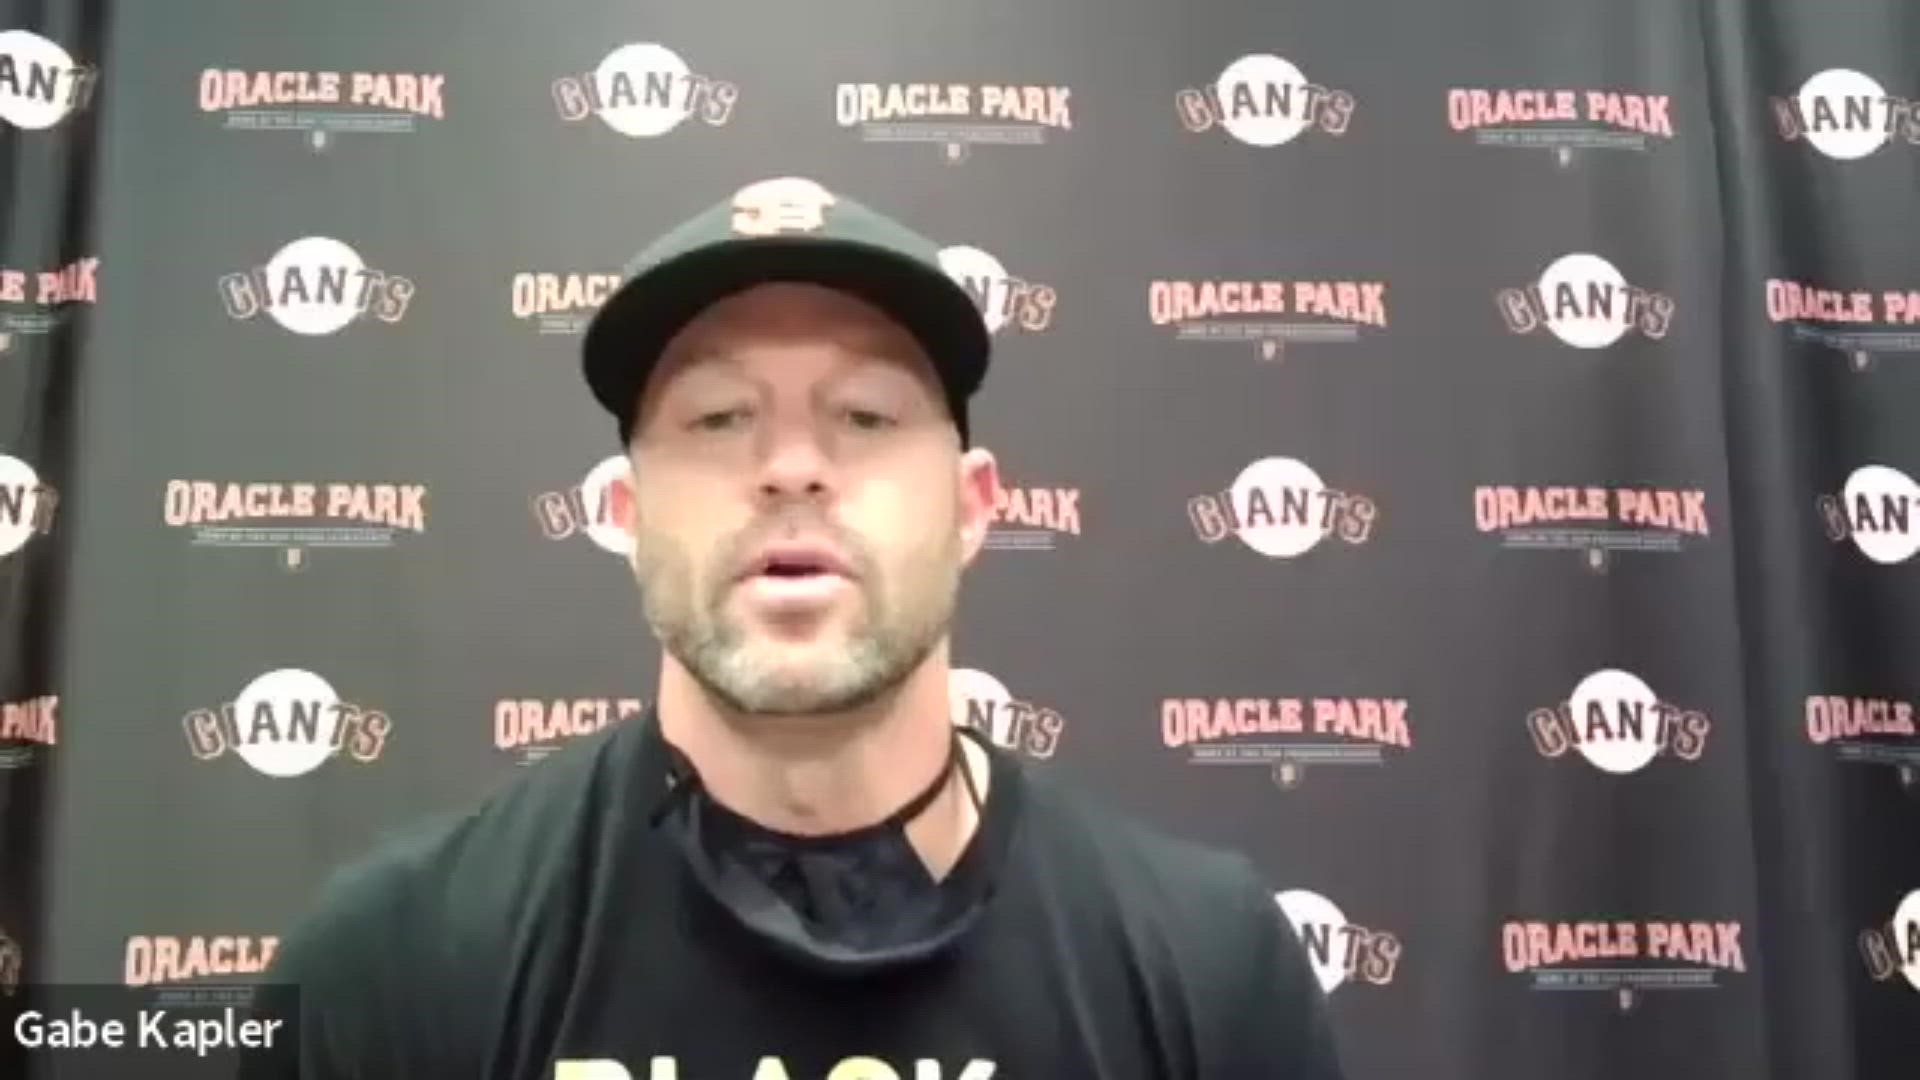 Giants manager Gabe Kapler discusses the decision made with the Dodgers to postpone Wednesday's game in protest of the Jacob Blake police shooting in Kenosha, WI.